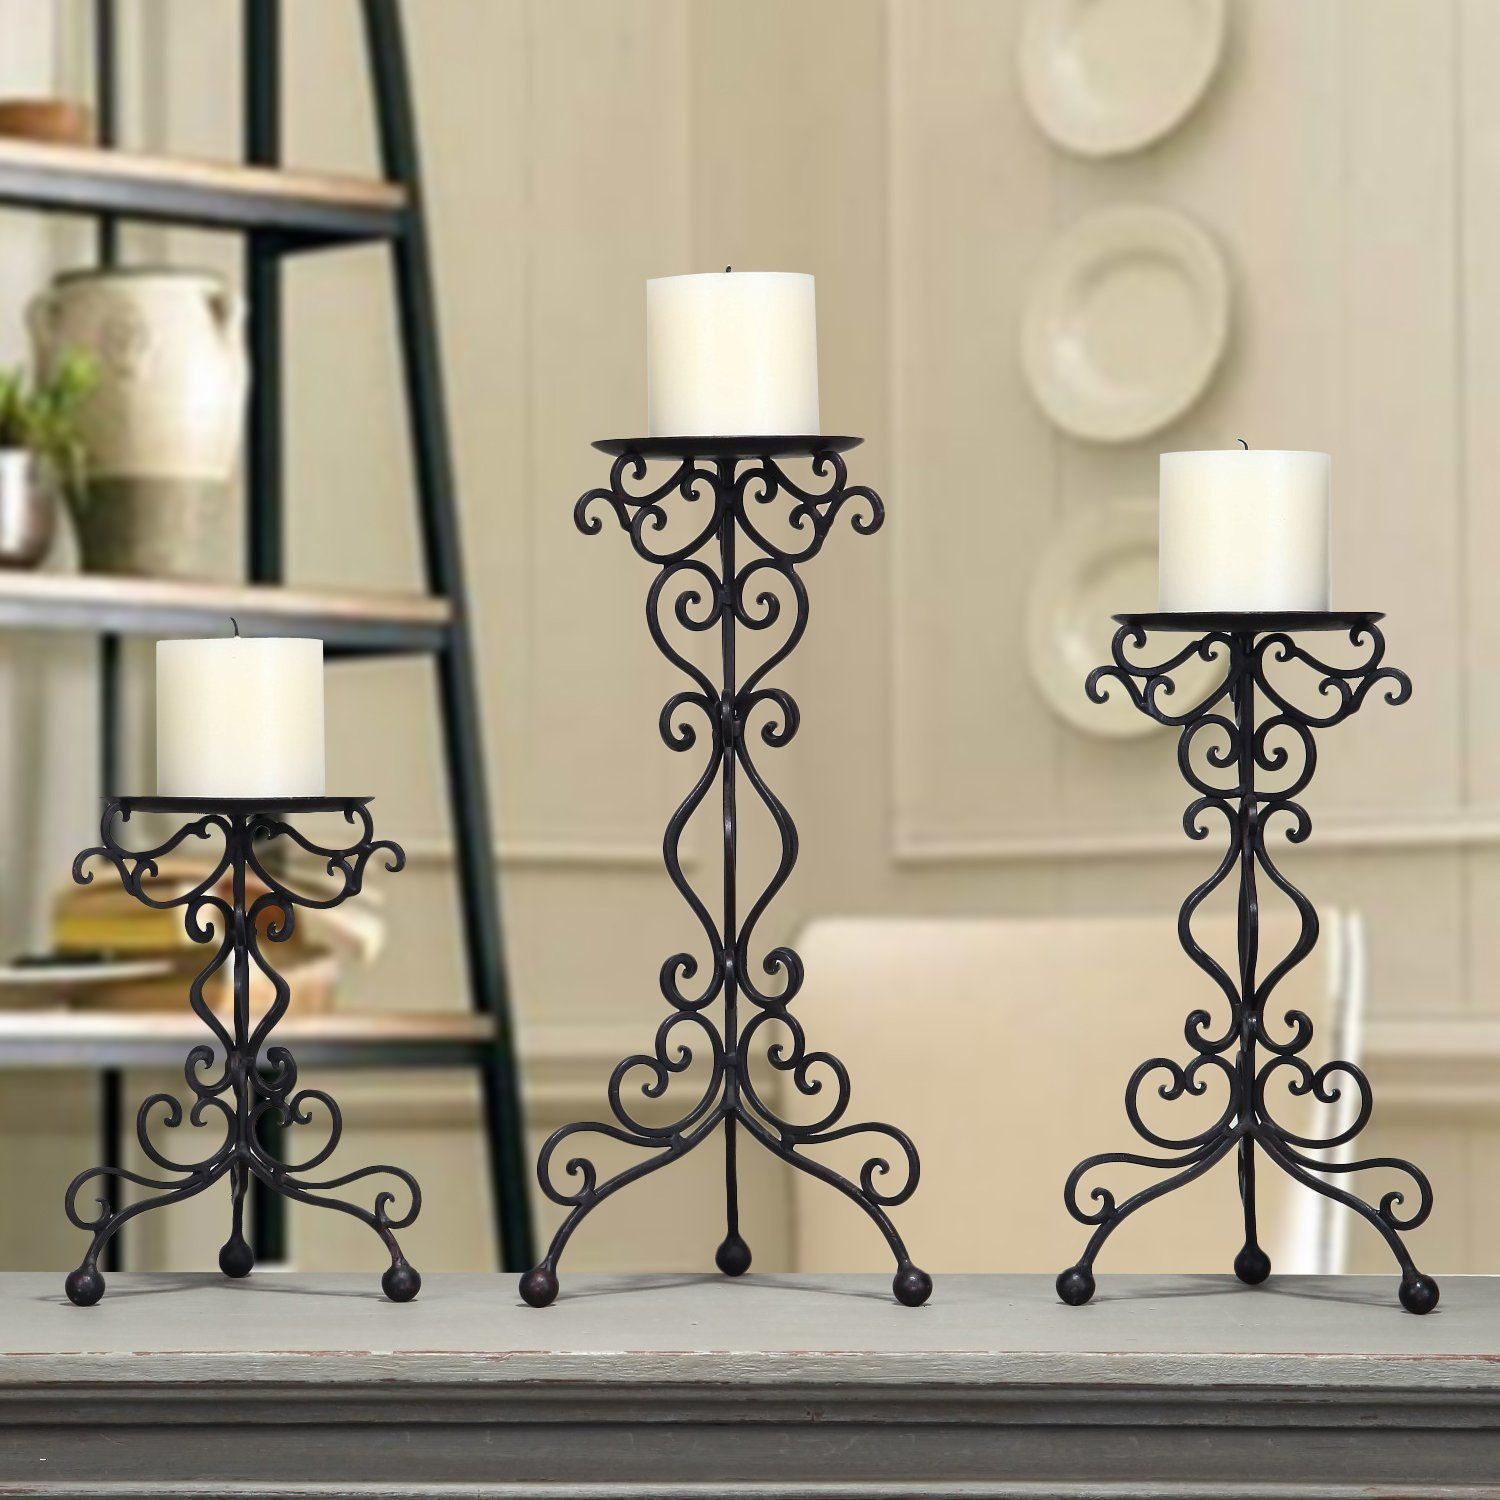 26 Nice Cheap Candle Vases 2024 free download cheap candle vases of table top lighting awesome adeco iron scroll table top candle with regard to table top lighting awesome adeco iron scroll table top candle holders set 3 hd0013